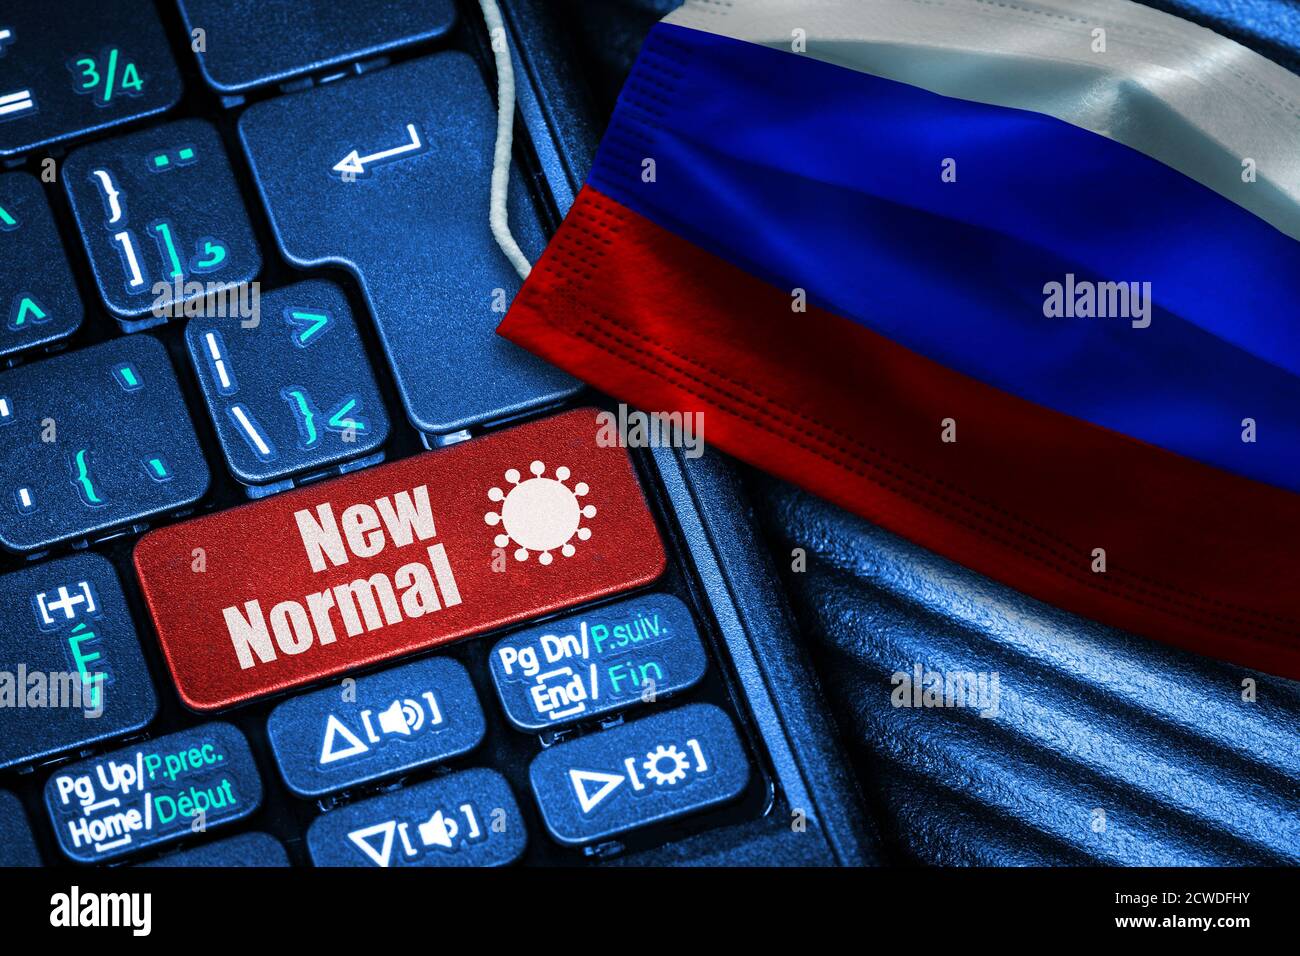 Concept of New Normal in Russia during Covid-19 with computer keyboard red button text and face mask showing Russian Flag. Stock Photo